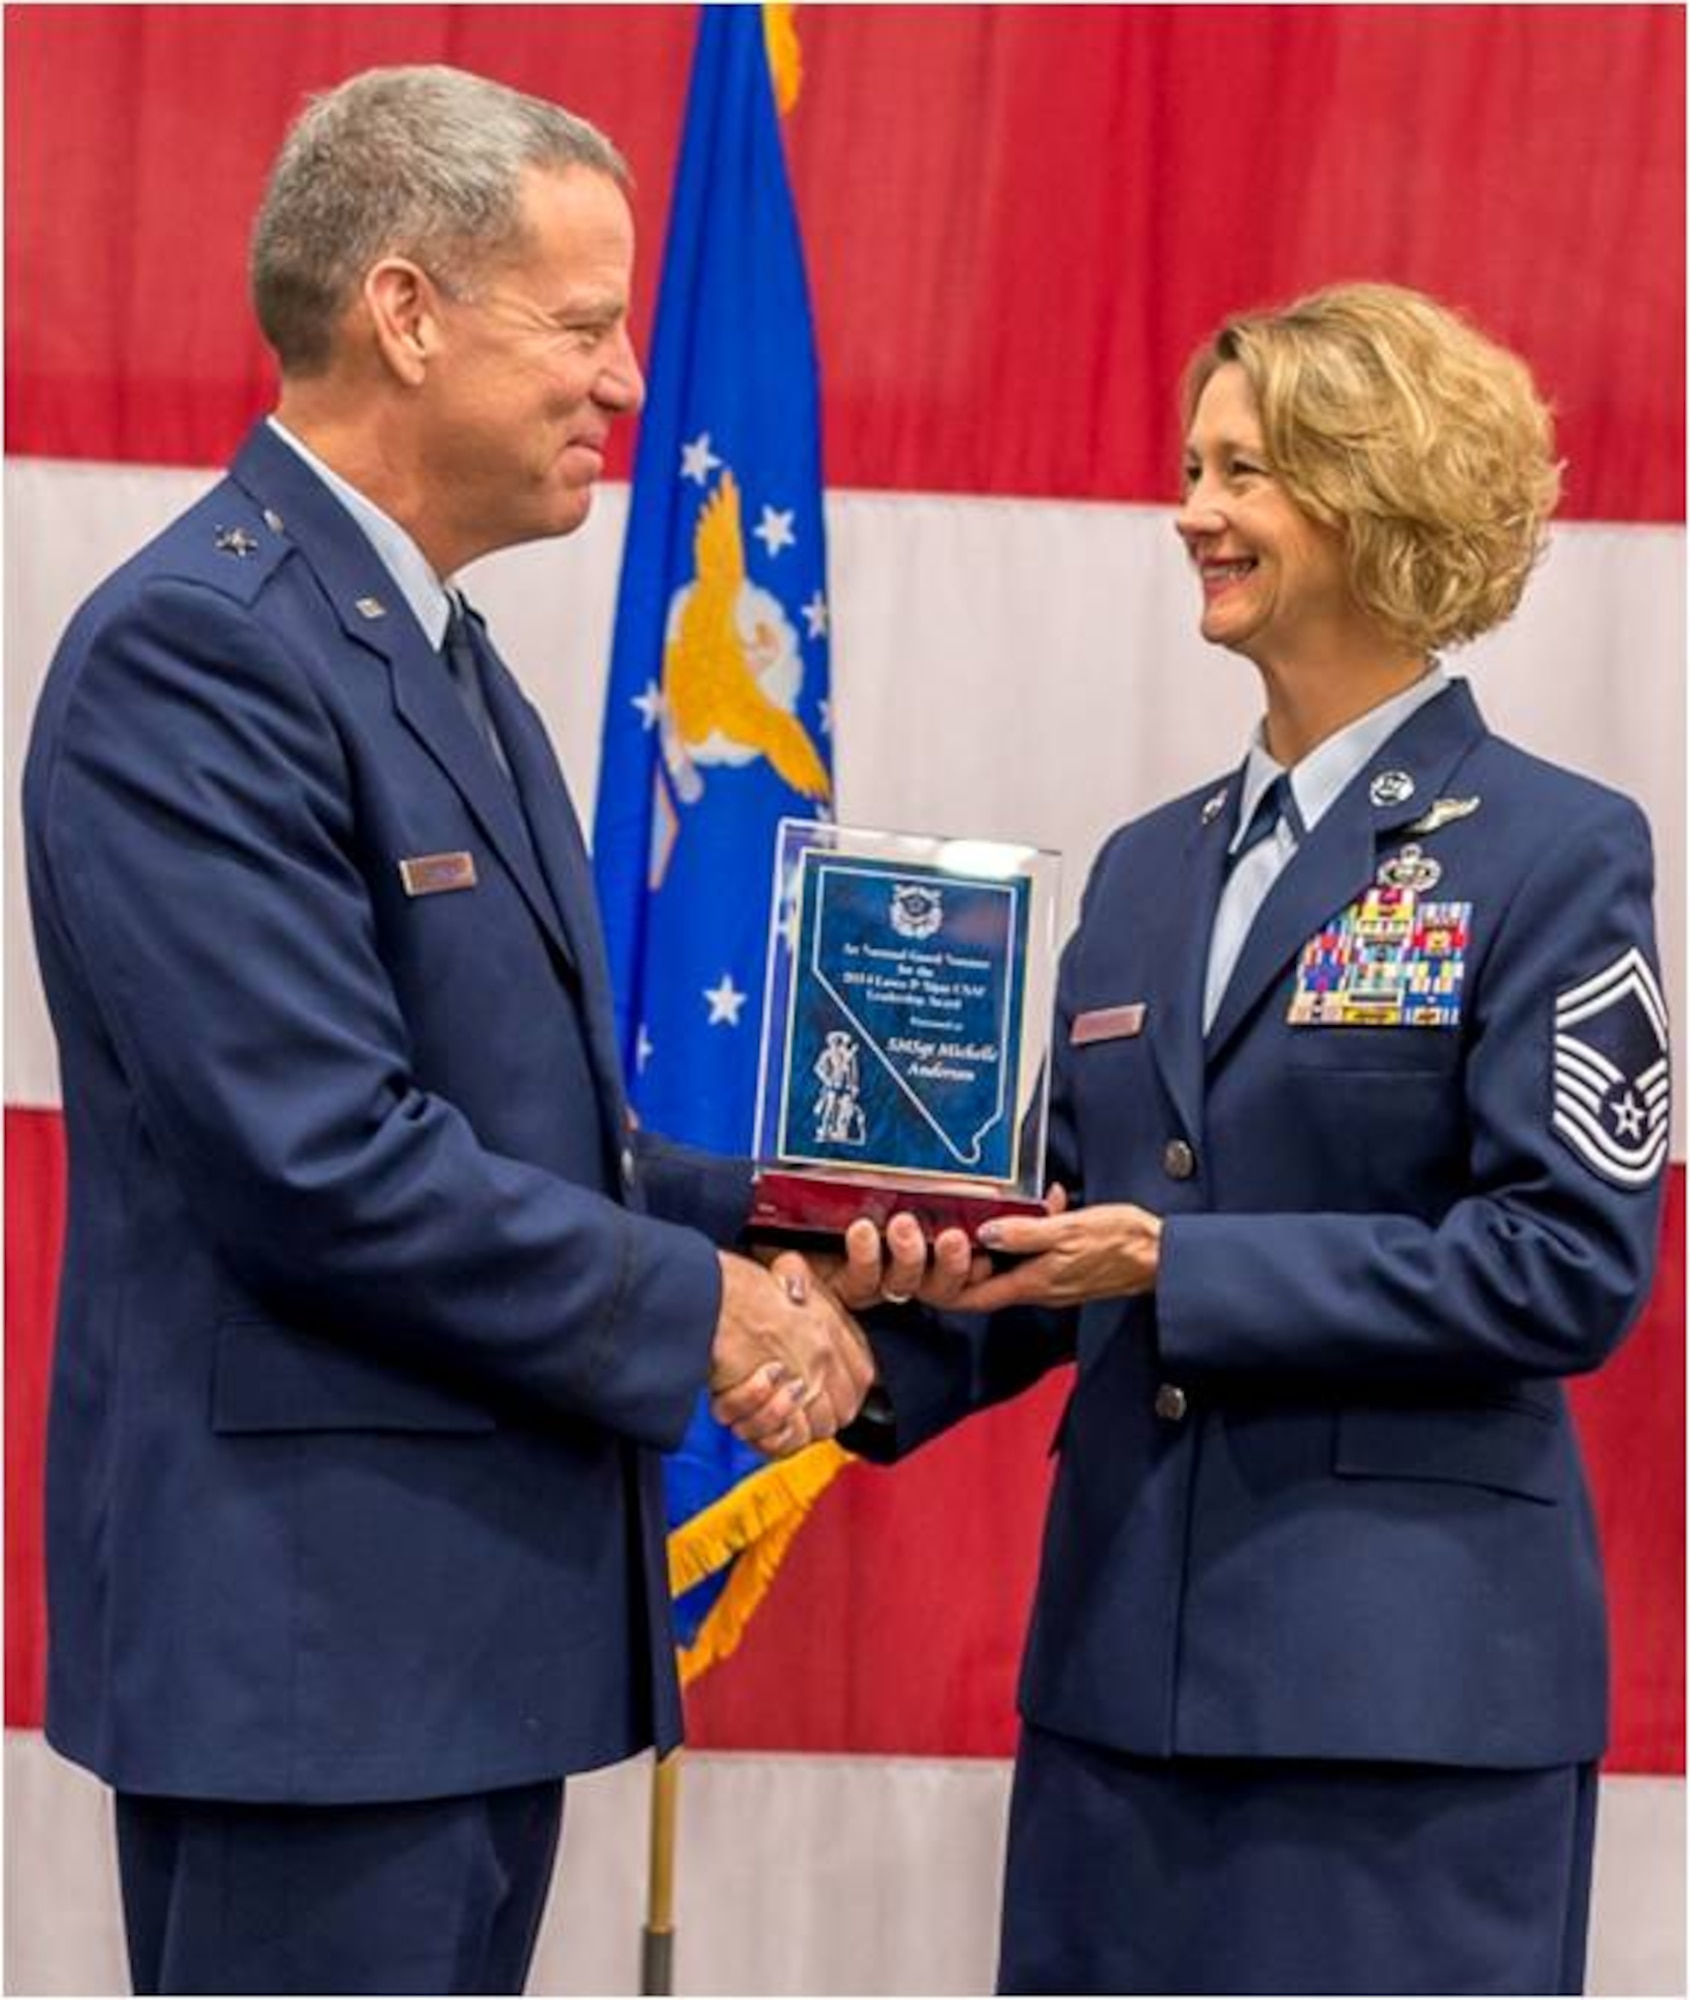 Senior Master Sgt. Michelle Anderson of the 152nd Intelligence Squadron accepts the United States Air Force’s Lance P. Sijan Leadership Award from Brig. Gen. David Snyder at the Nevada Air National Guard’s Annual Awards Ceremony on December 7, 2014.USAF photo by Maj. Kristoffer Pfalmer RELEASED.